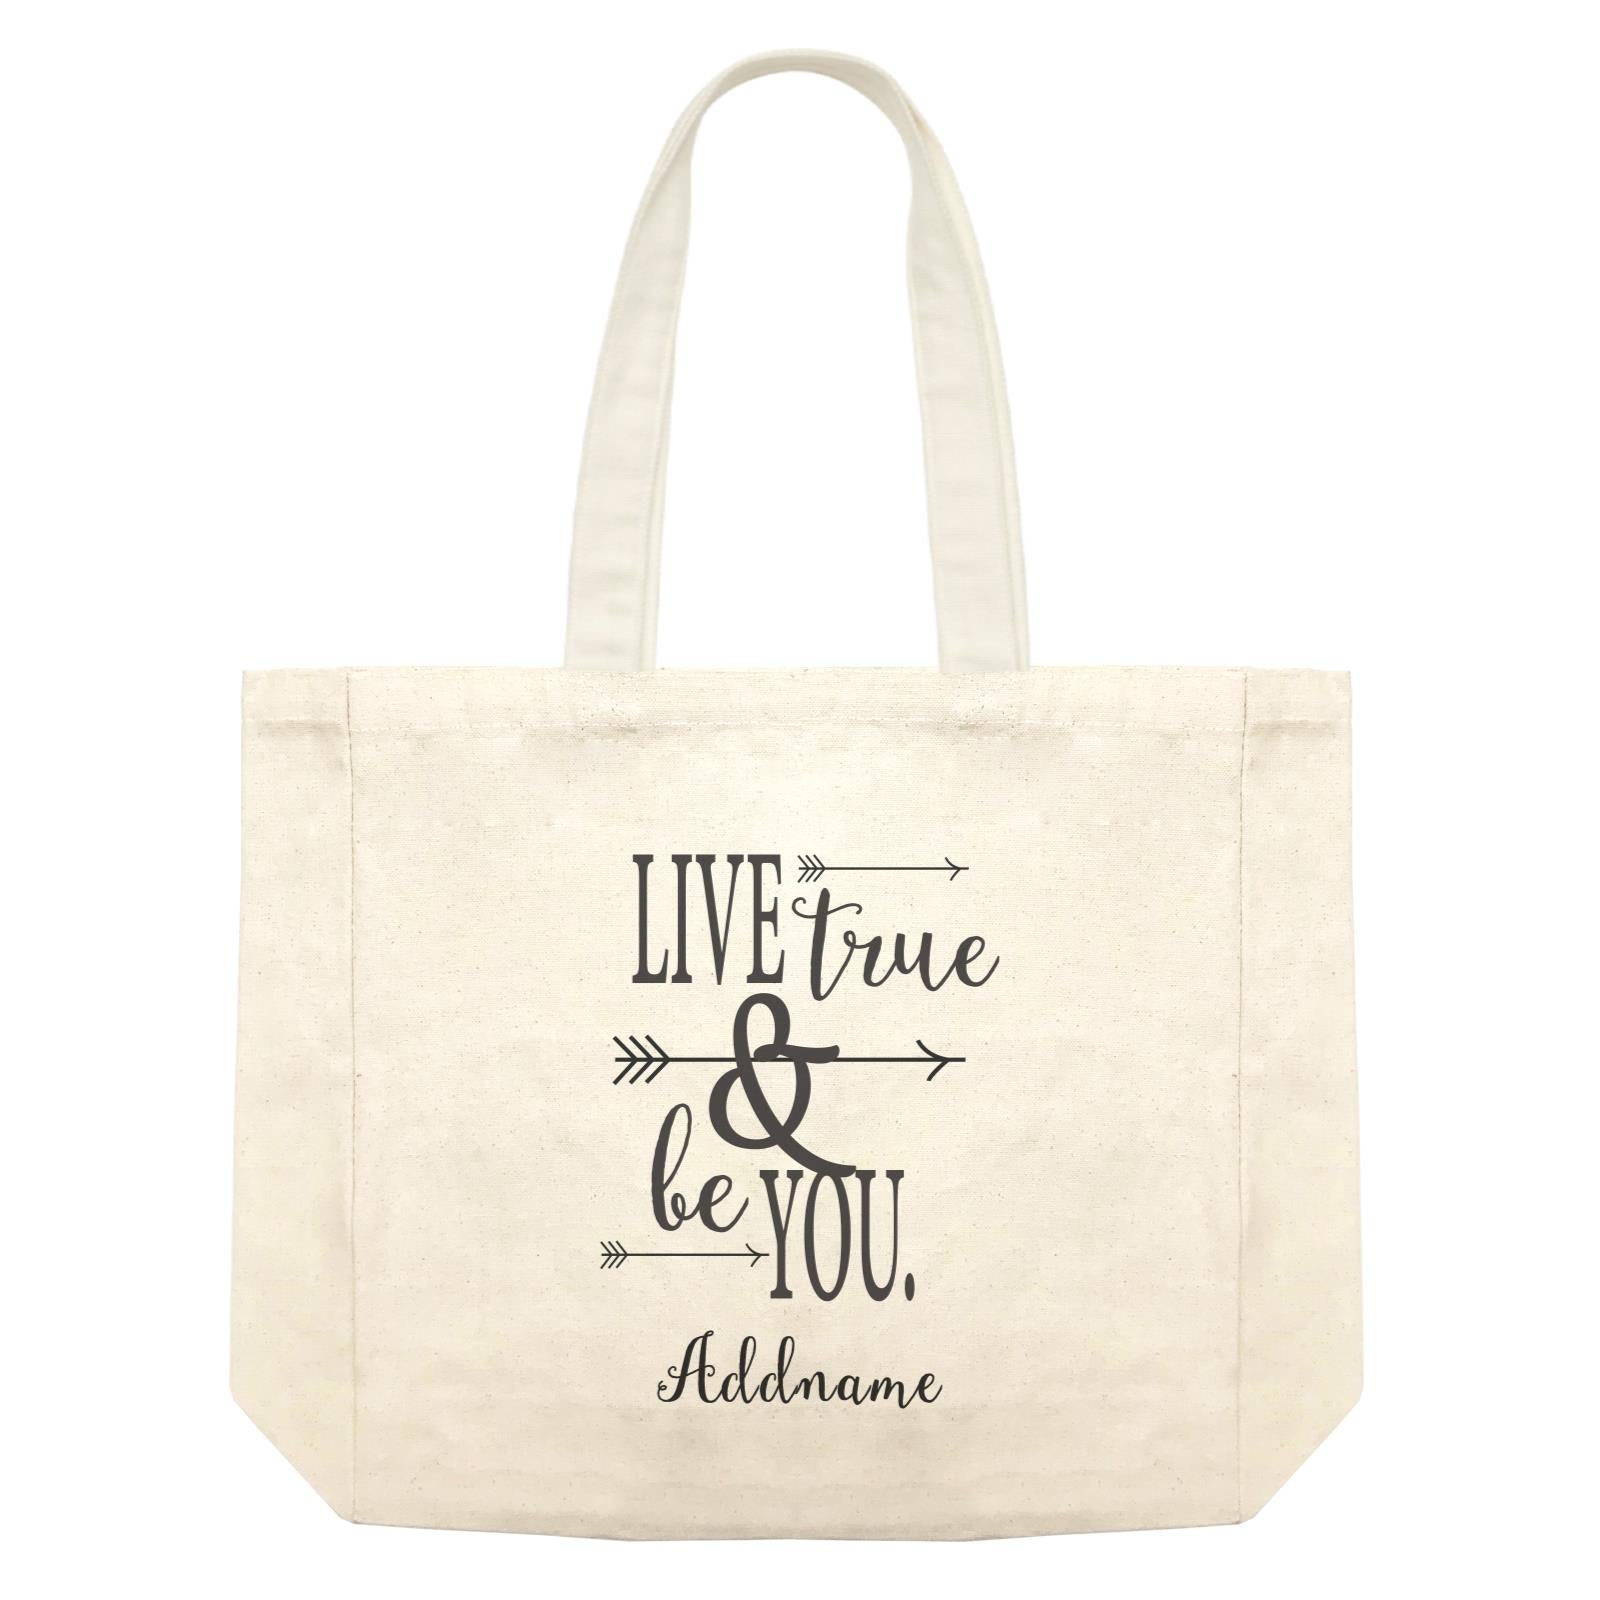 Inspiration Quotes Live True And Be You Addname Shopping Bag